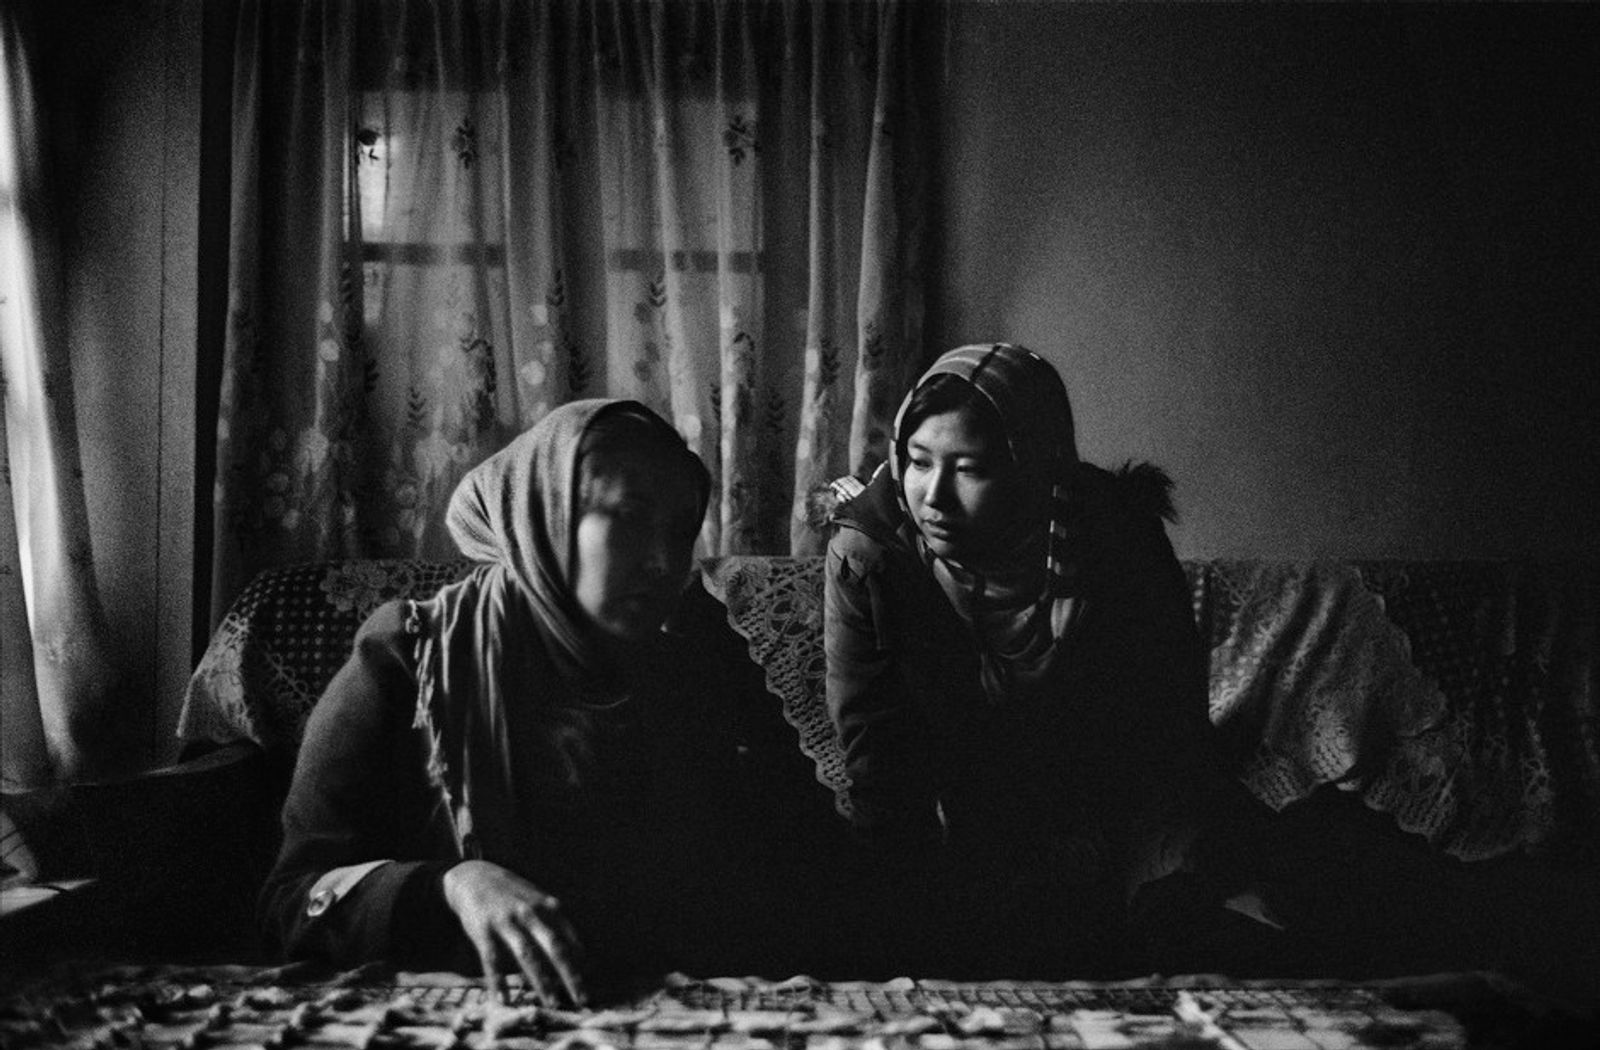 © Lorenzo Tugnoli - Image from the The Little Book of Kabul photography project